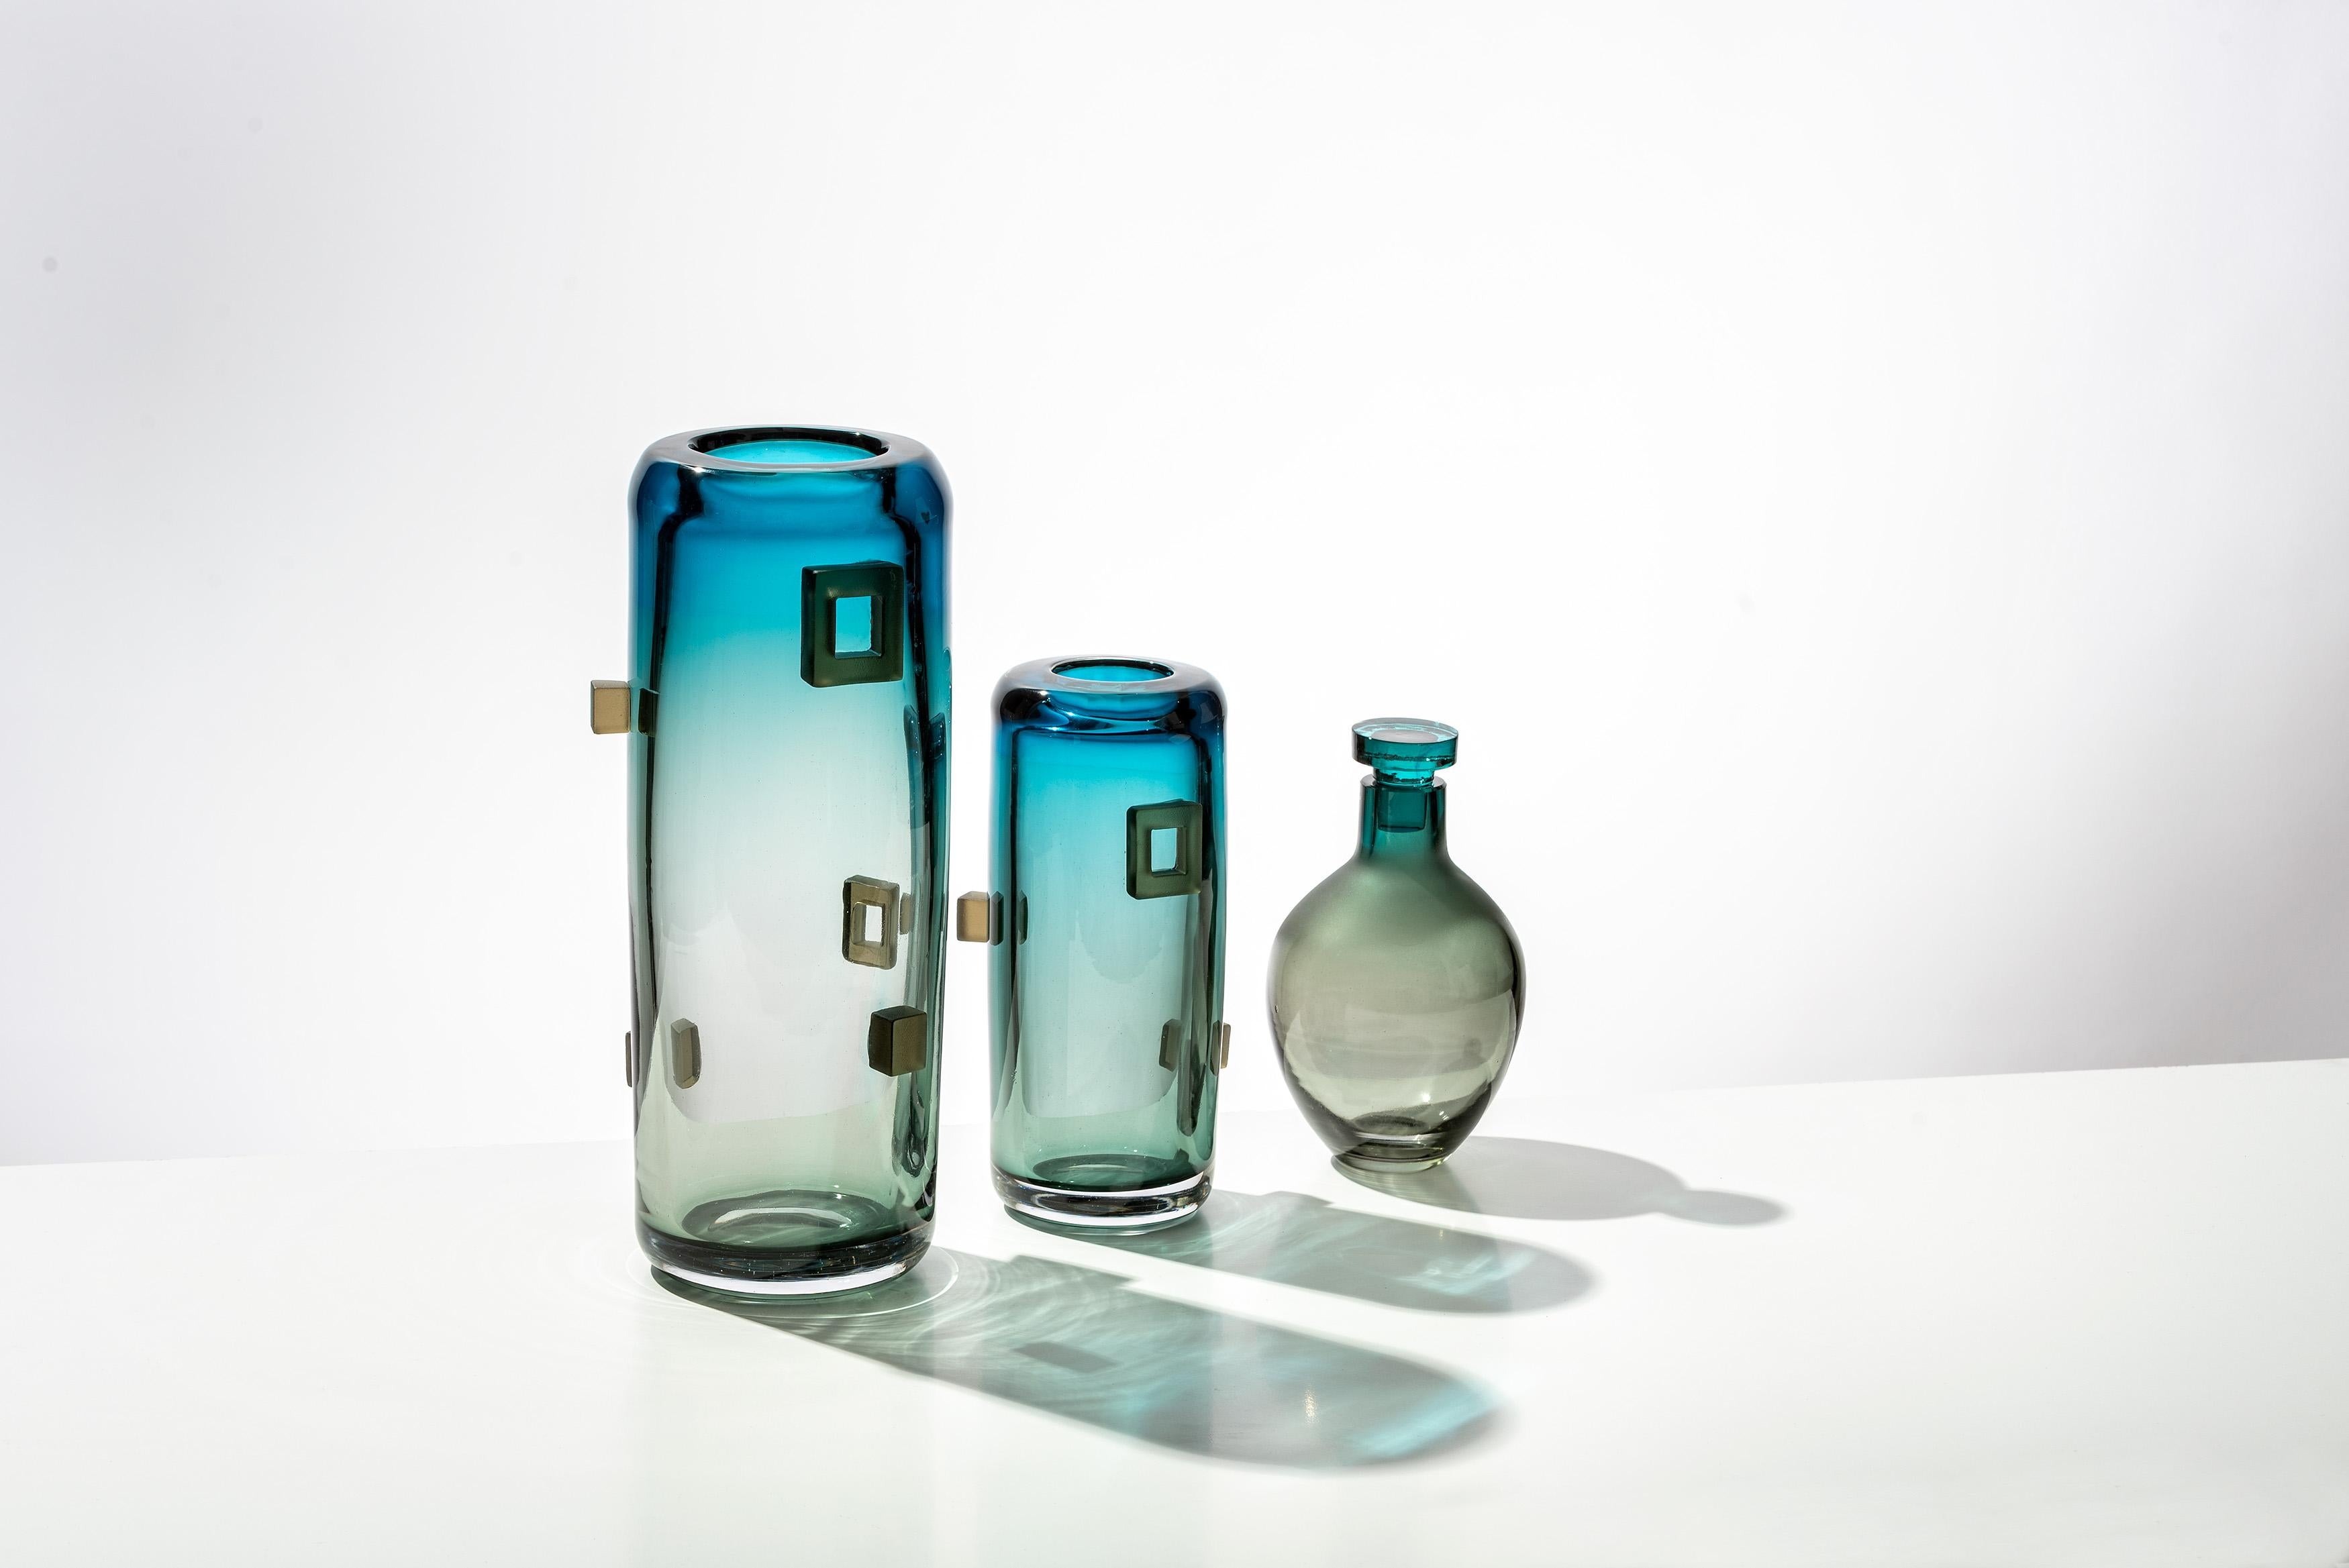 Truly unique glass liquor decanters that will style your bar like no other. Each piece of this glass barware is custom made, mouth blown using two attractive colors that blend into each other.
Handmade by Feleksan Onar, a prominent glass artist with